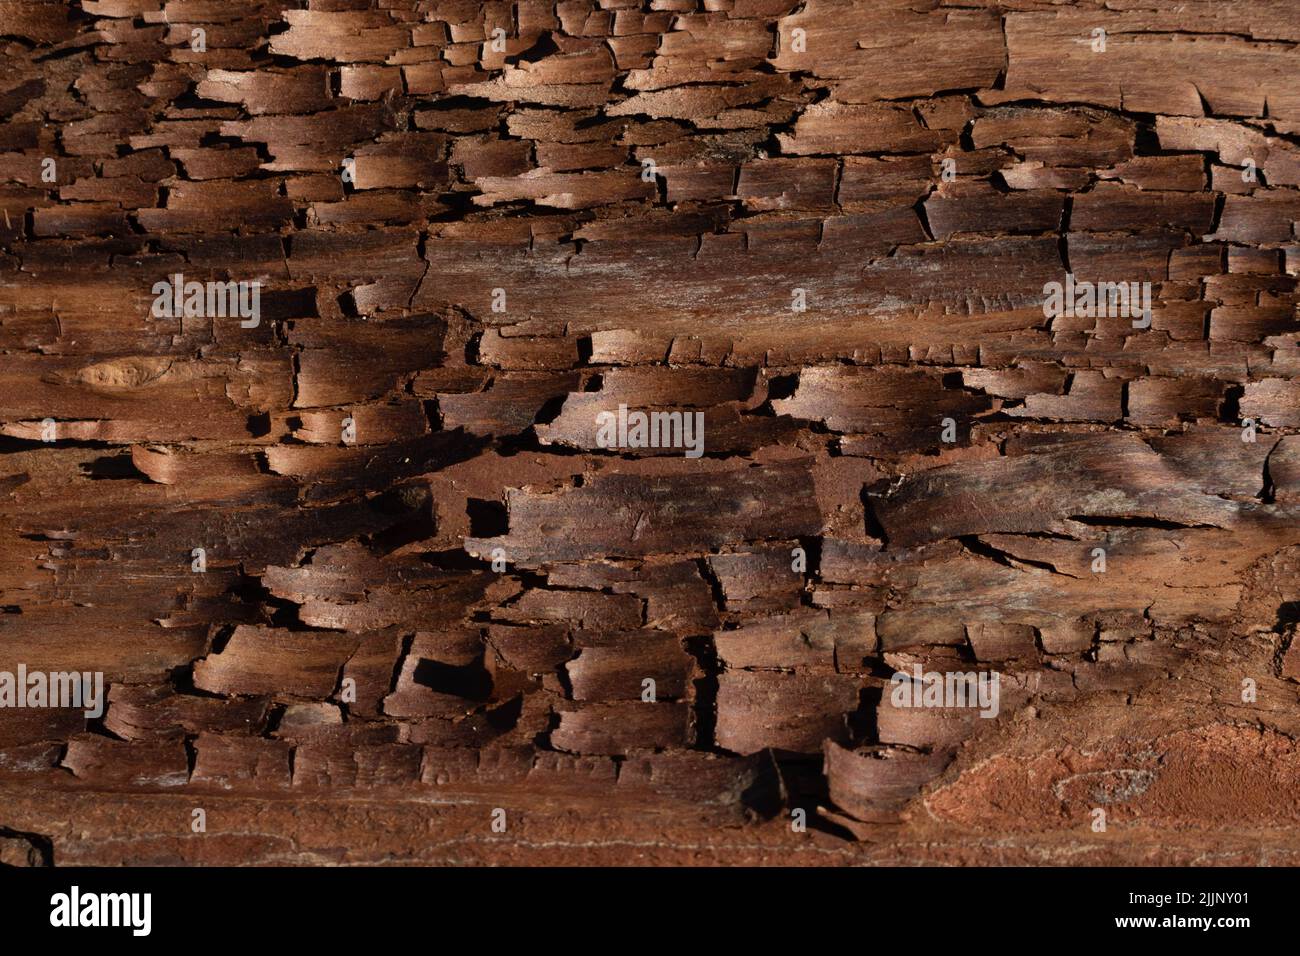 The bark pattern is a seamless wood texture. For background woodwork, brown hardwood bark. Stock Photo